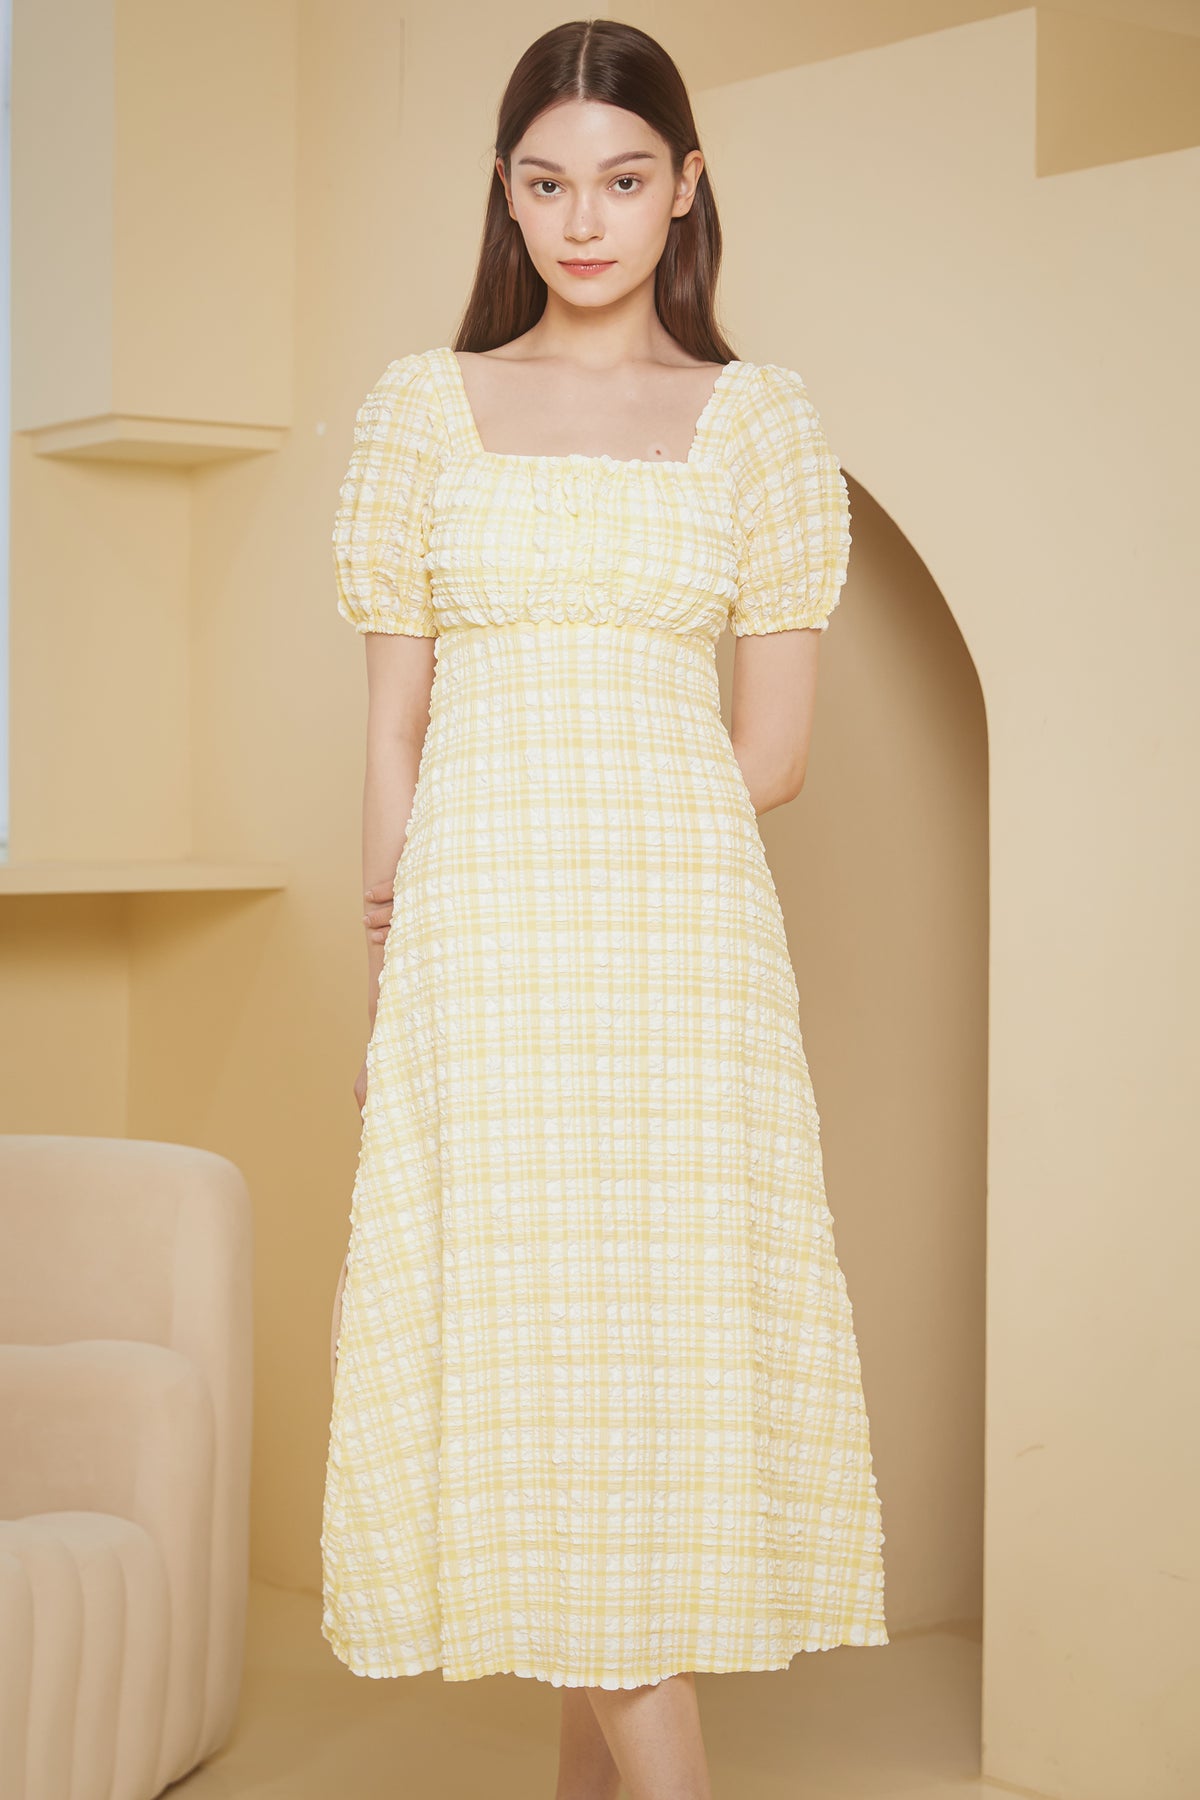 Waffle Textured Shoelace Dress in Yellow Gingham